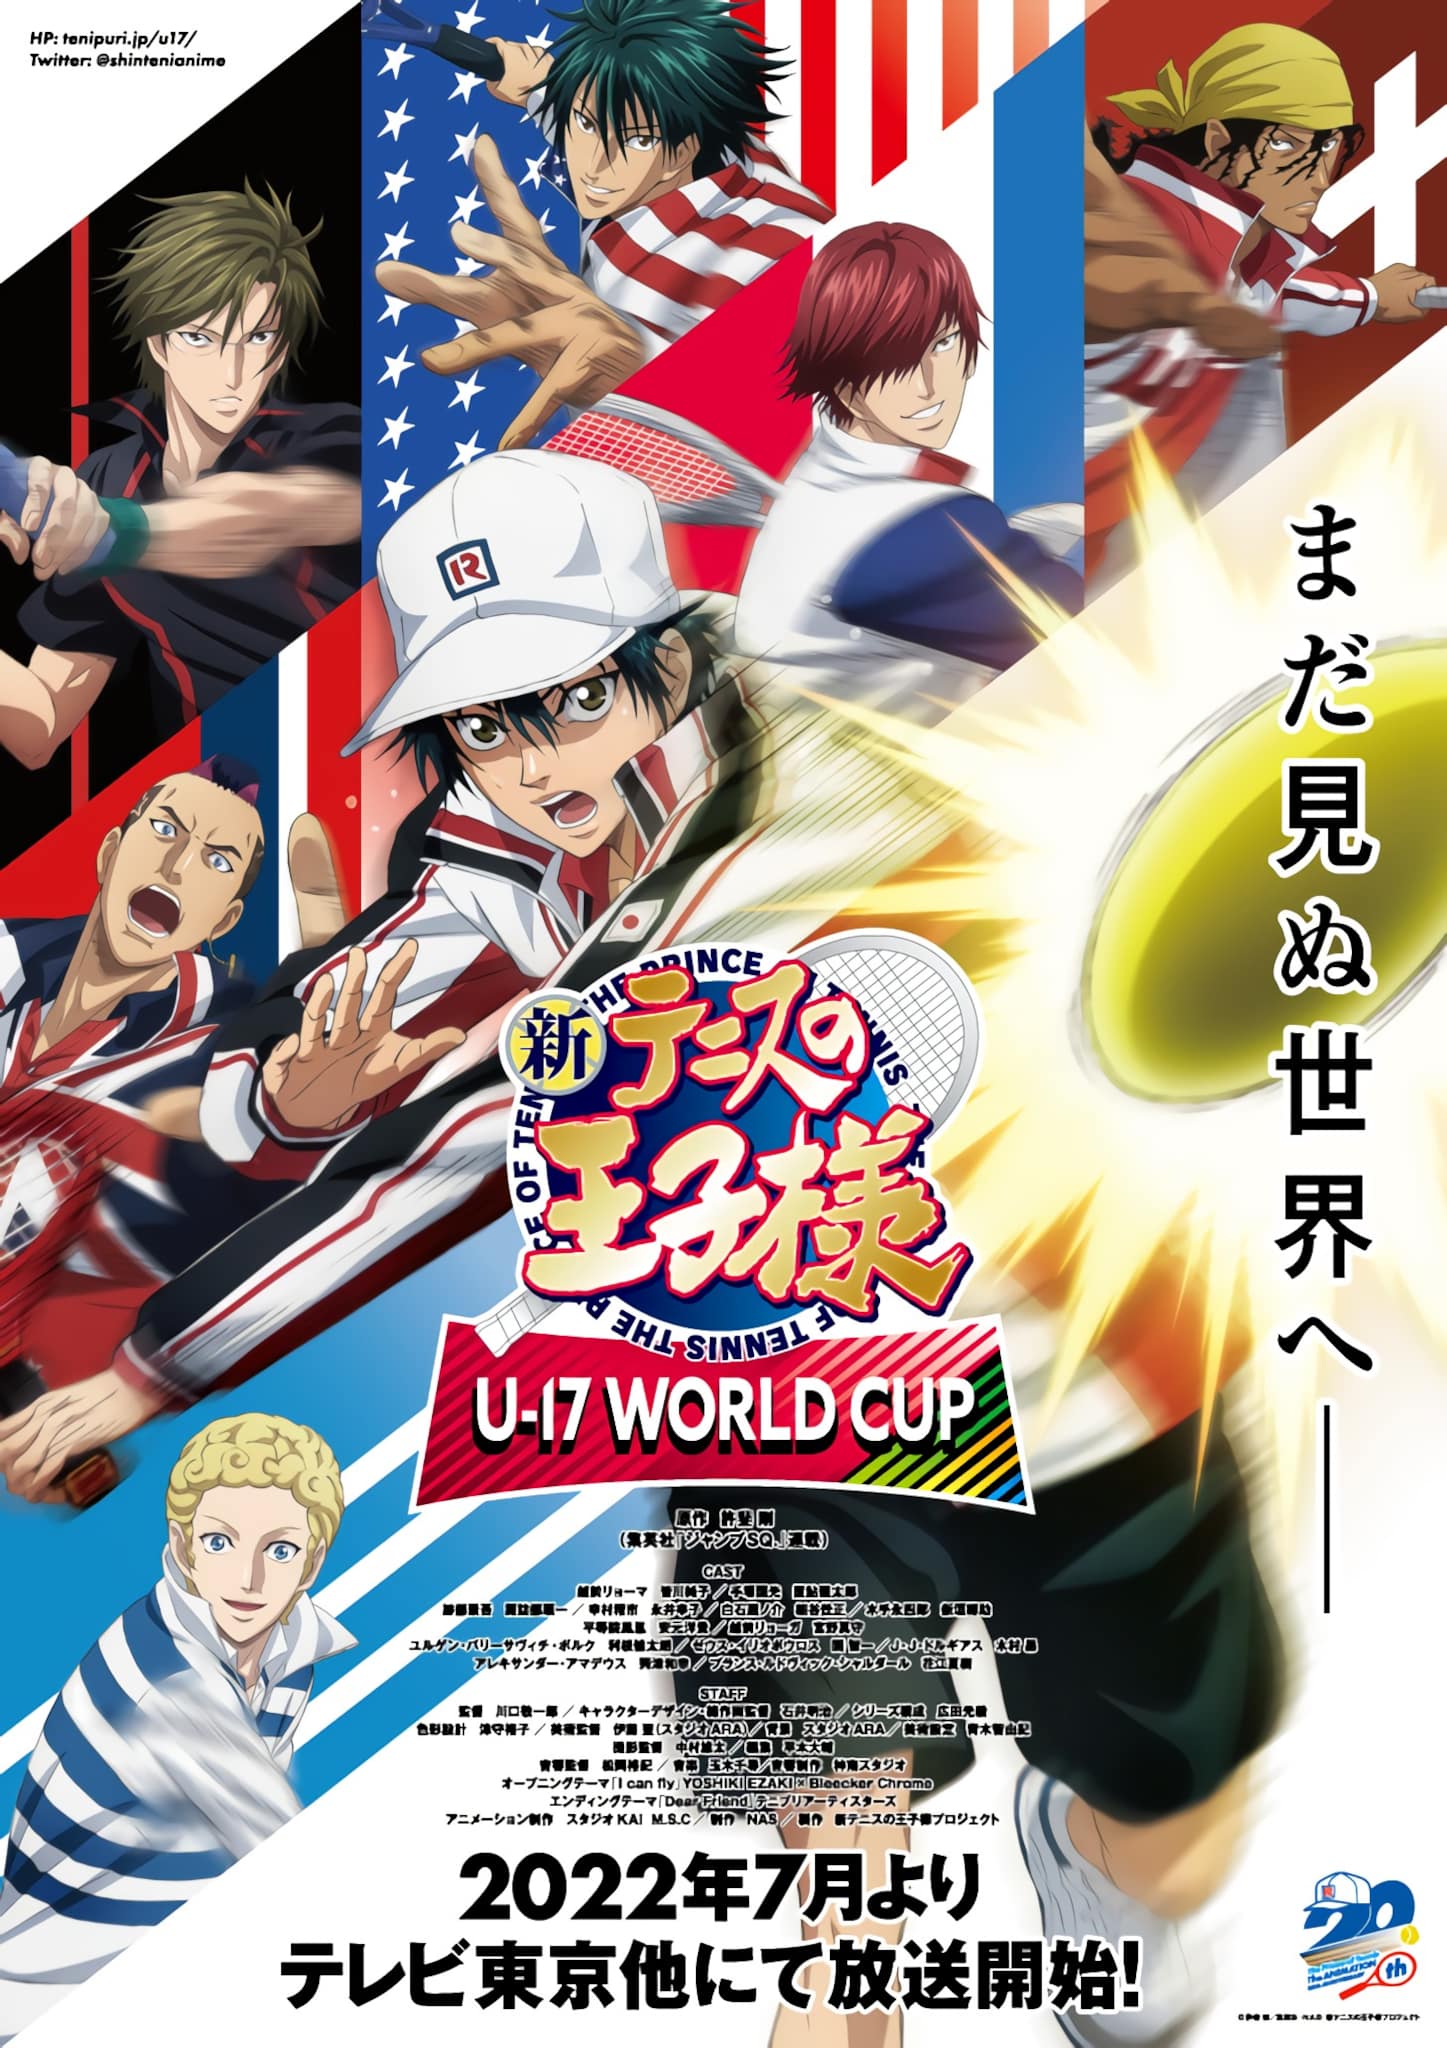 Second visuel pour lanime The New Prince of Tennis : U-17 World Cup